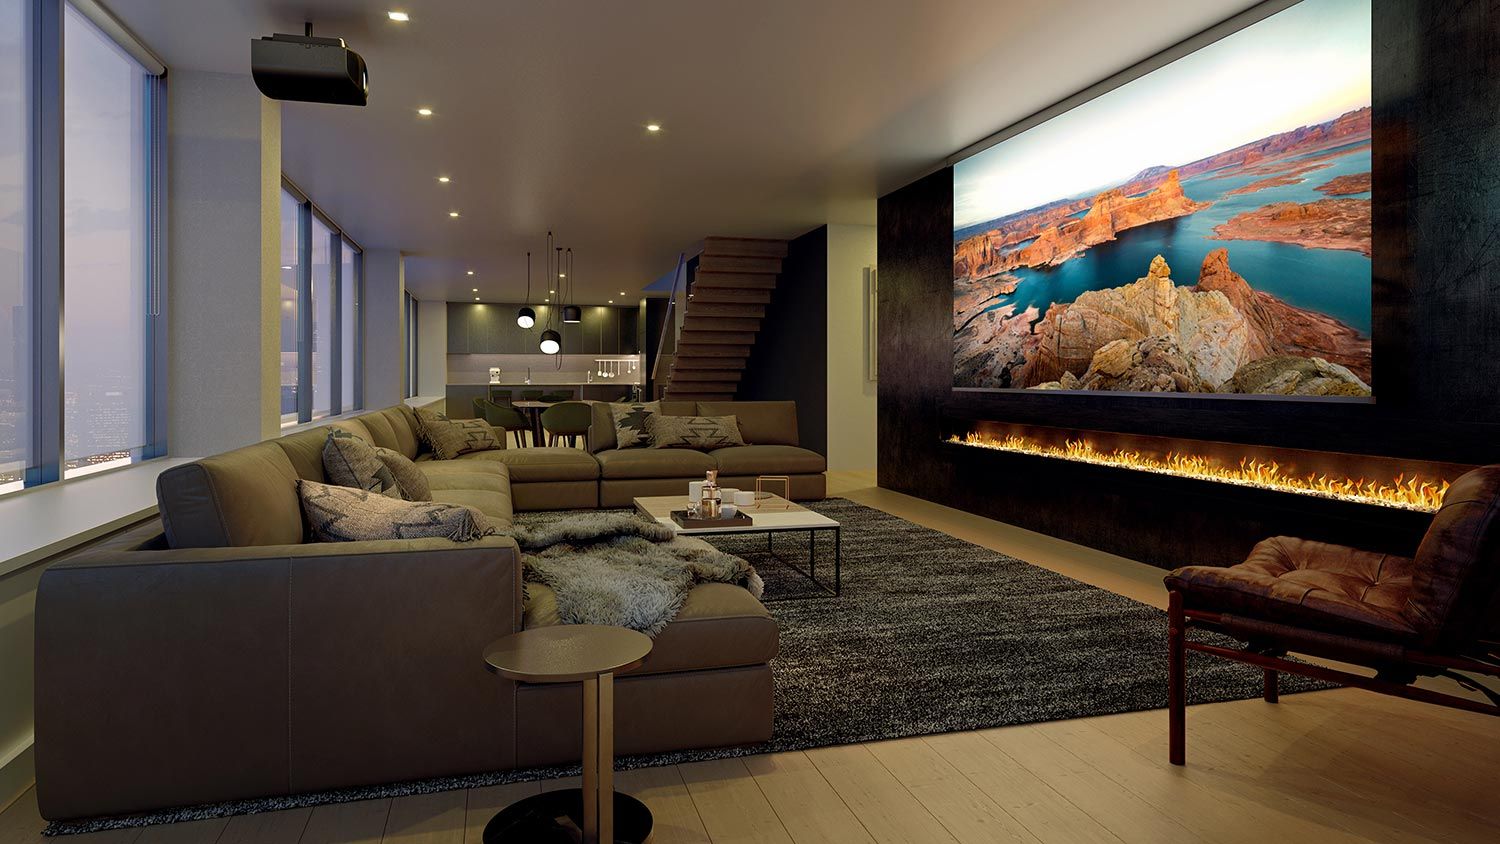 Sony Home Theater